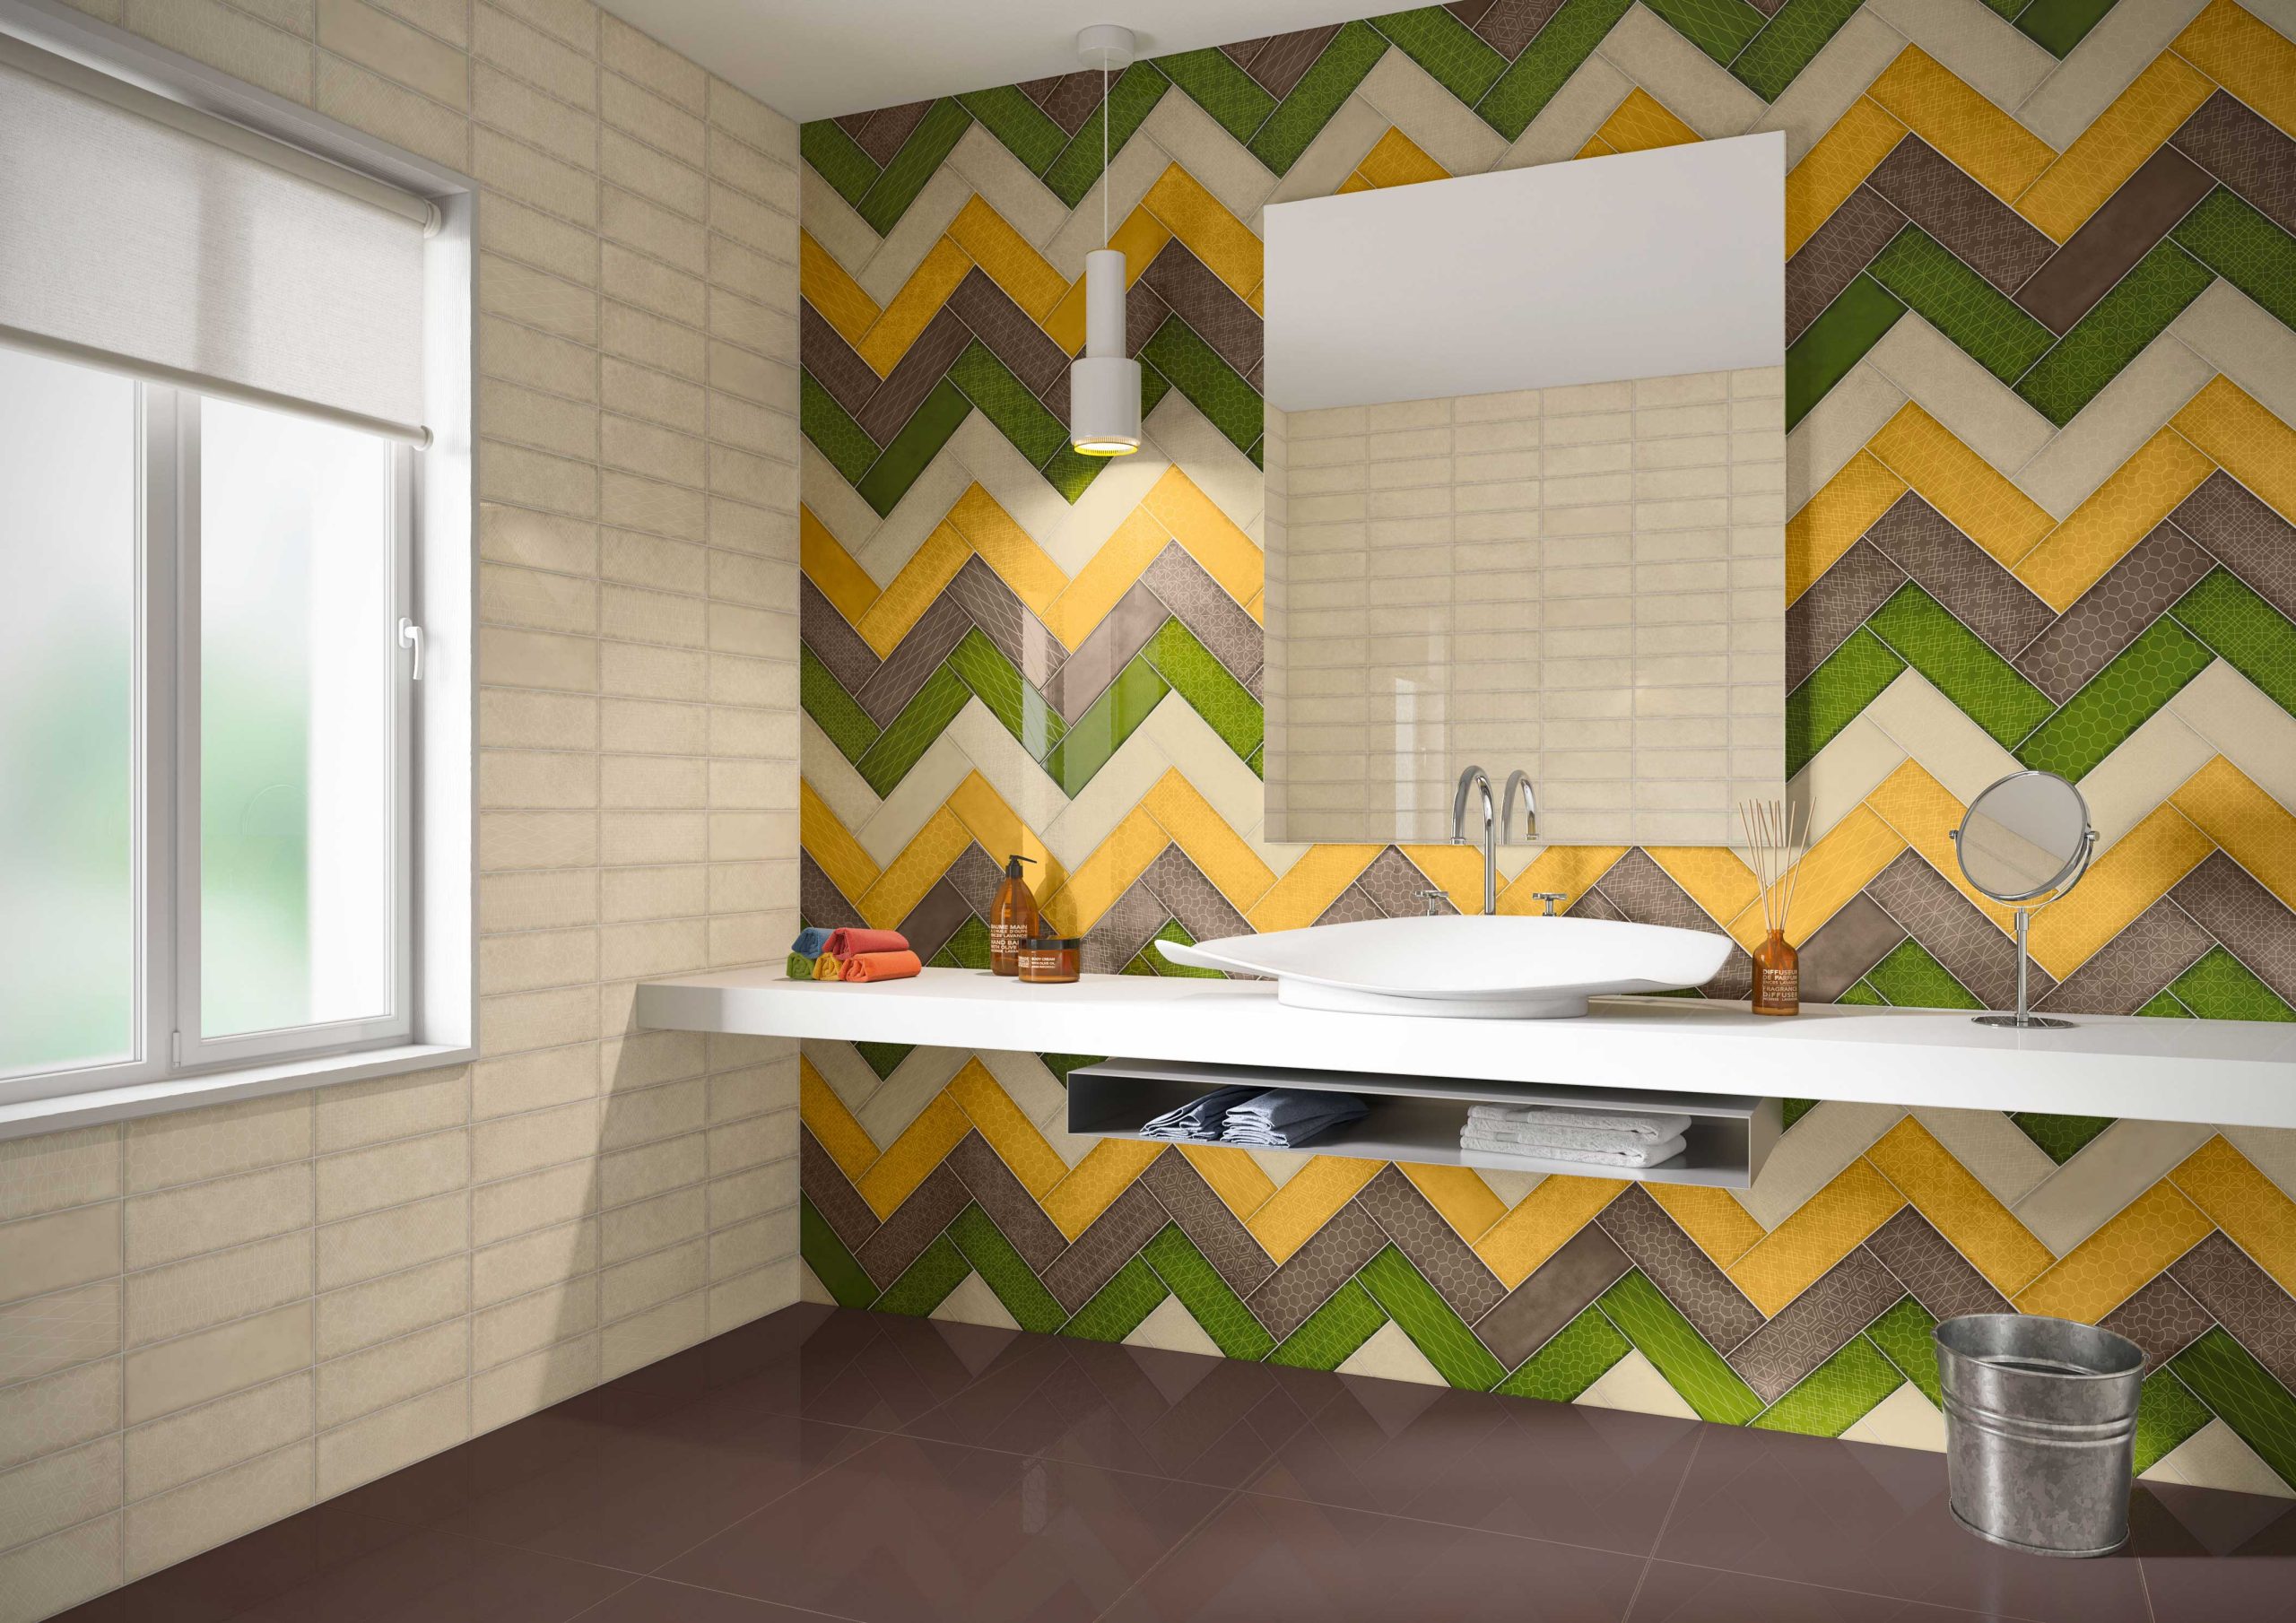 Nectar Ceramic Tile Collection Wall Materials Creative 